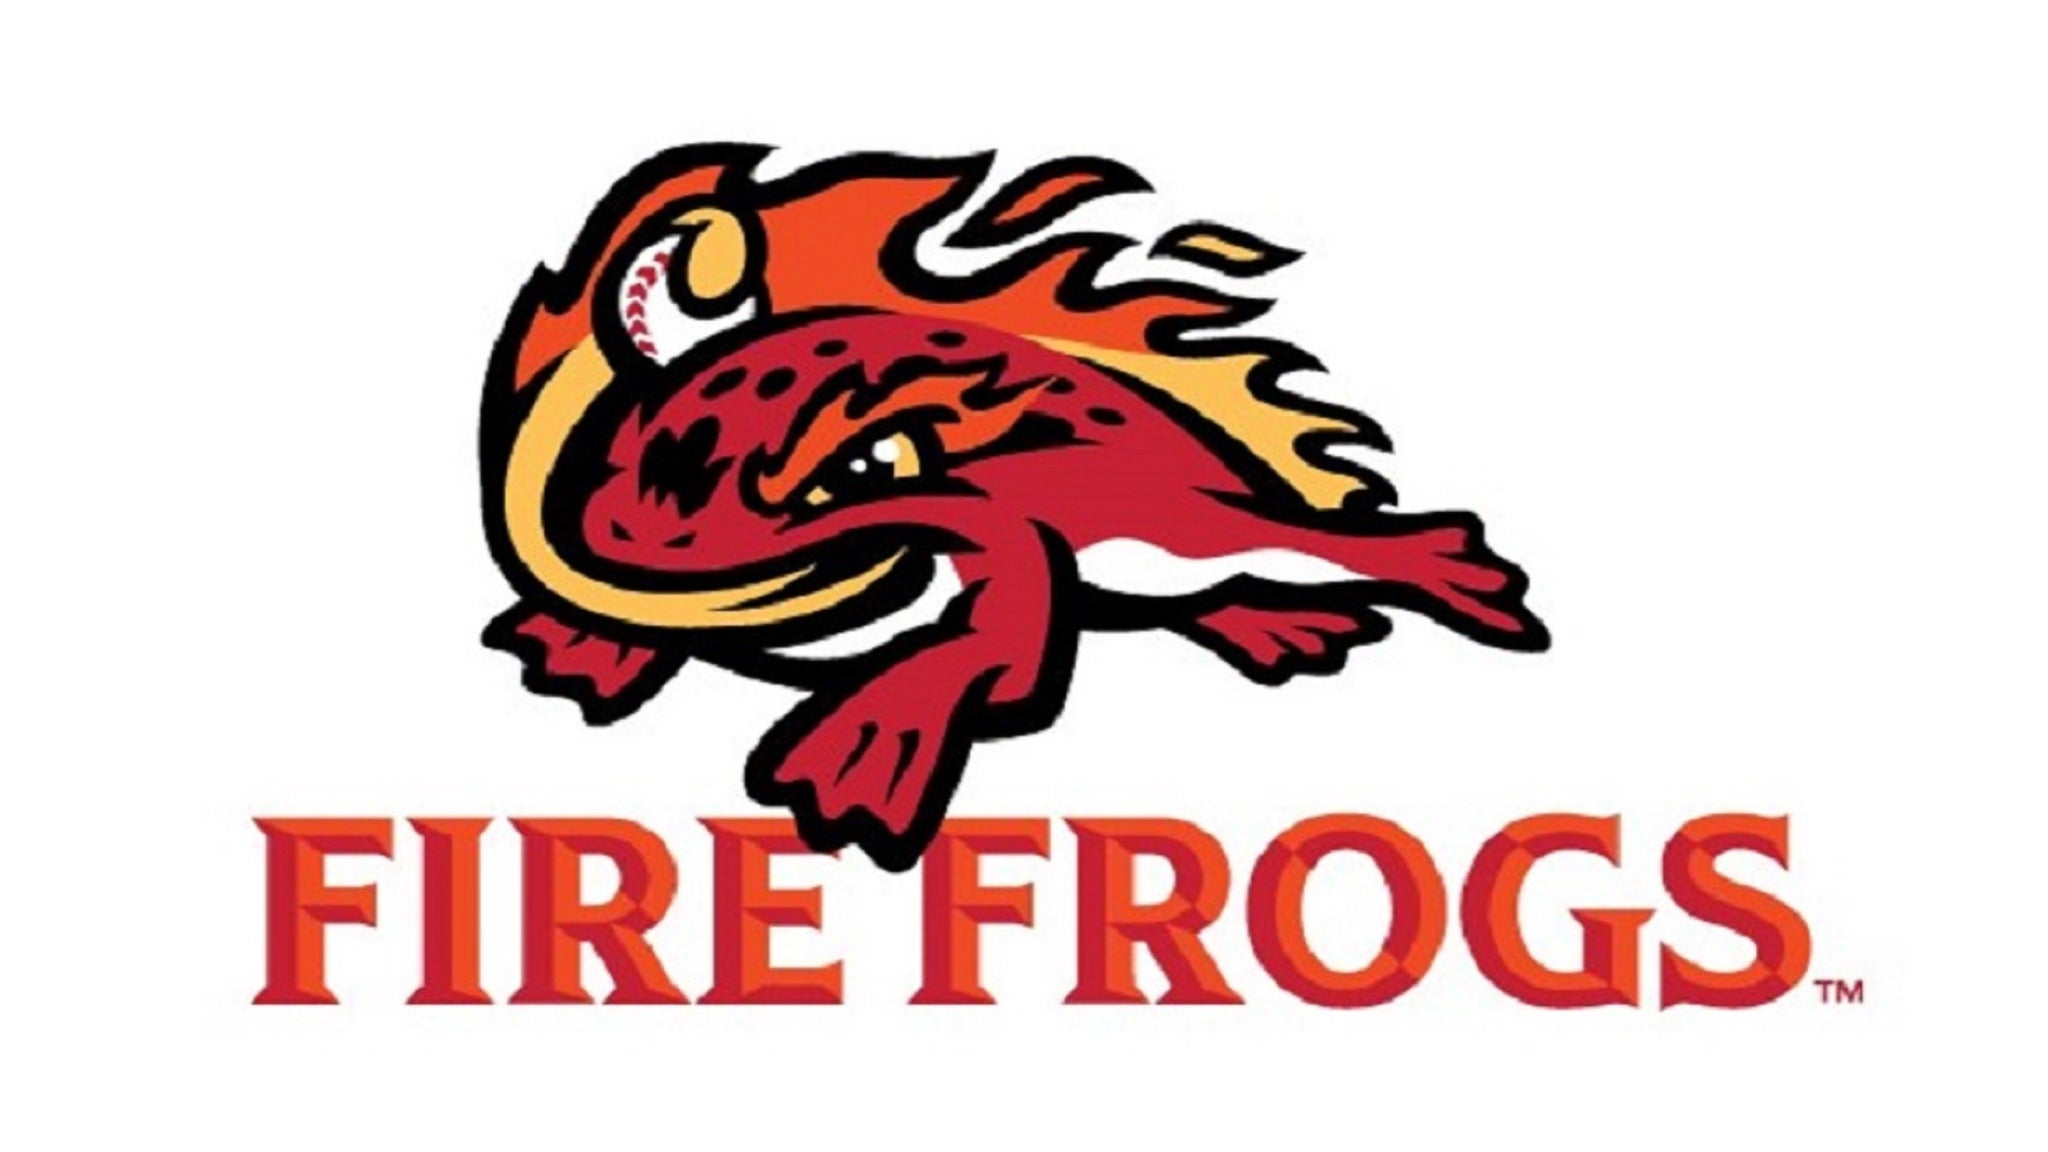 Florida Fire Frogs vs. Clearwater Threshers